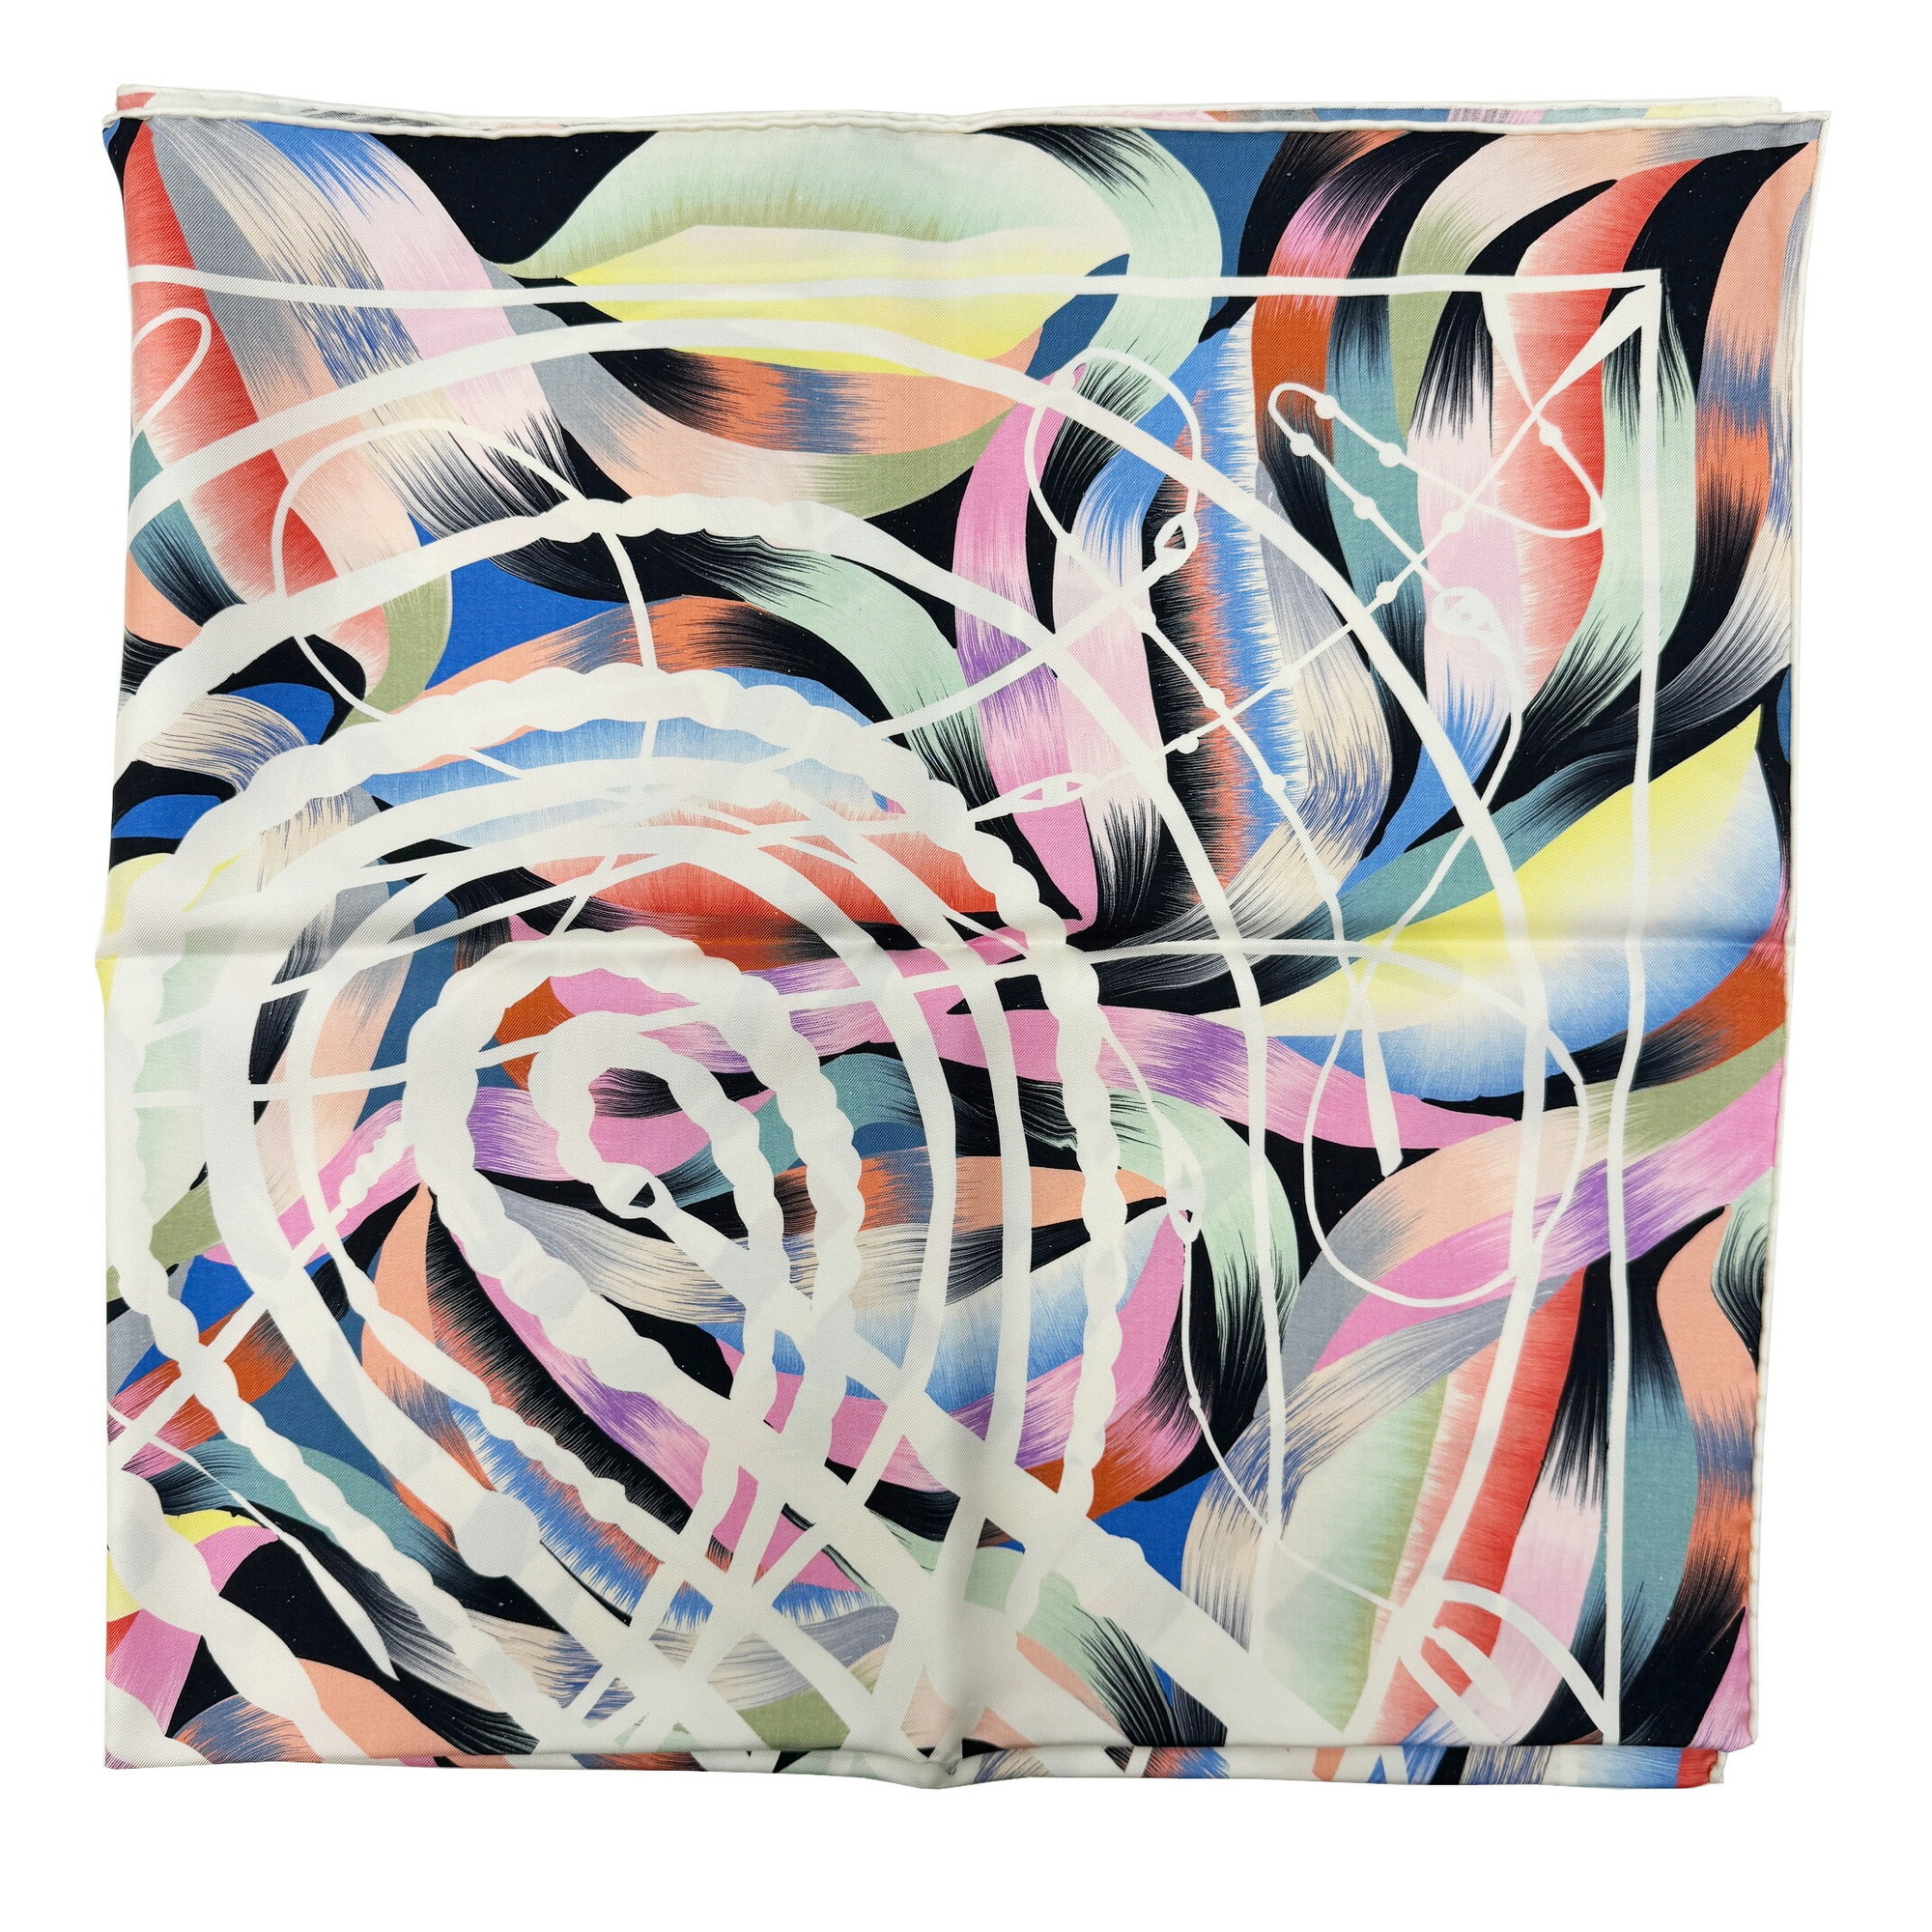 HERMES Carre 90 Scarf Large Marble 100% Silk Whip Togrip 2022 Collection Black Noir Multicolor